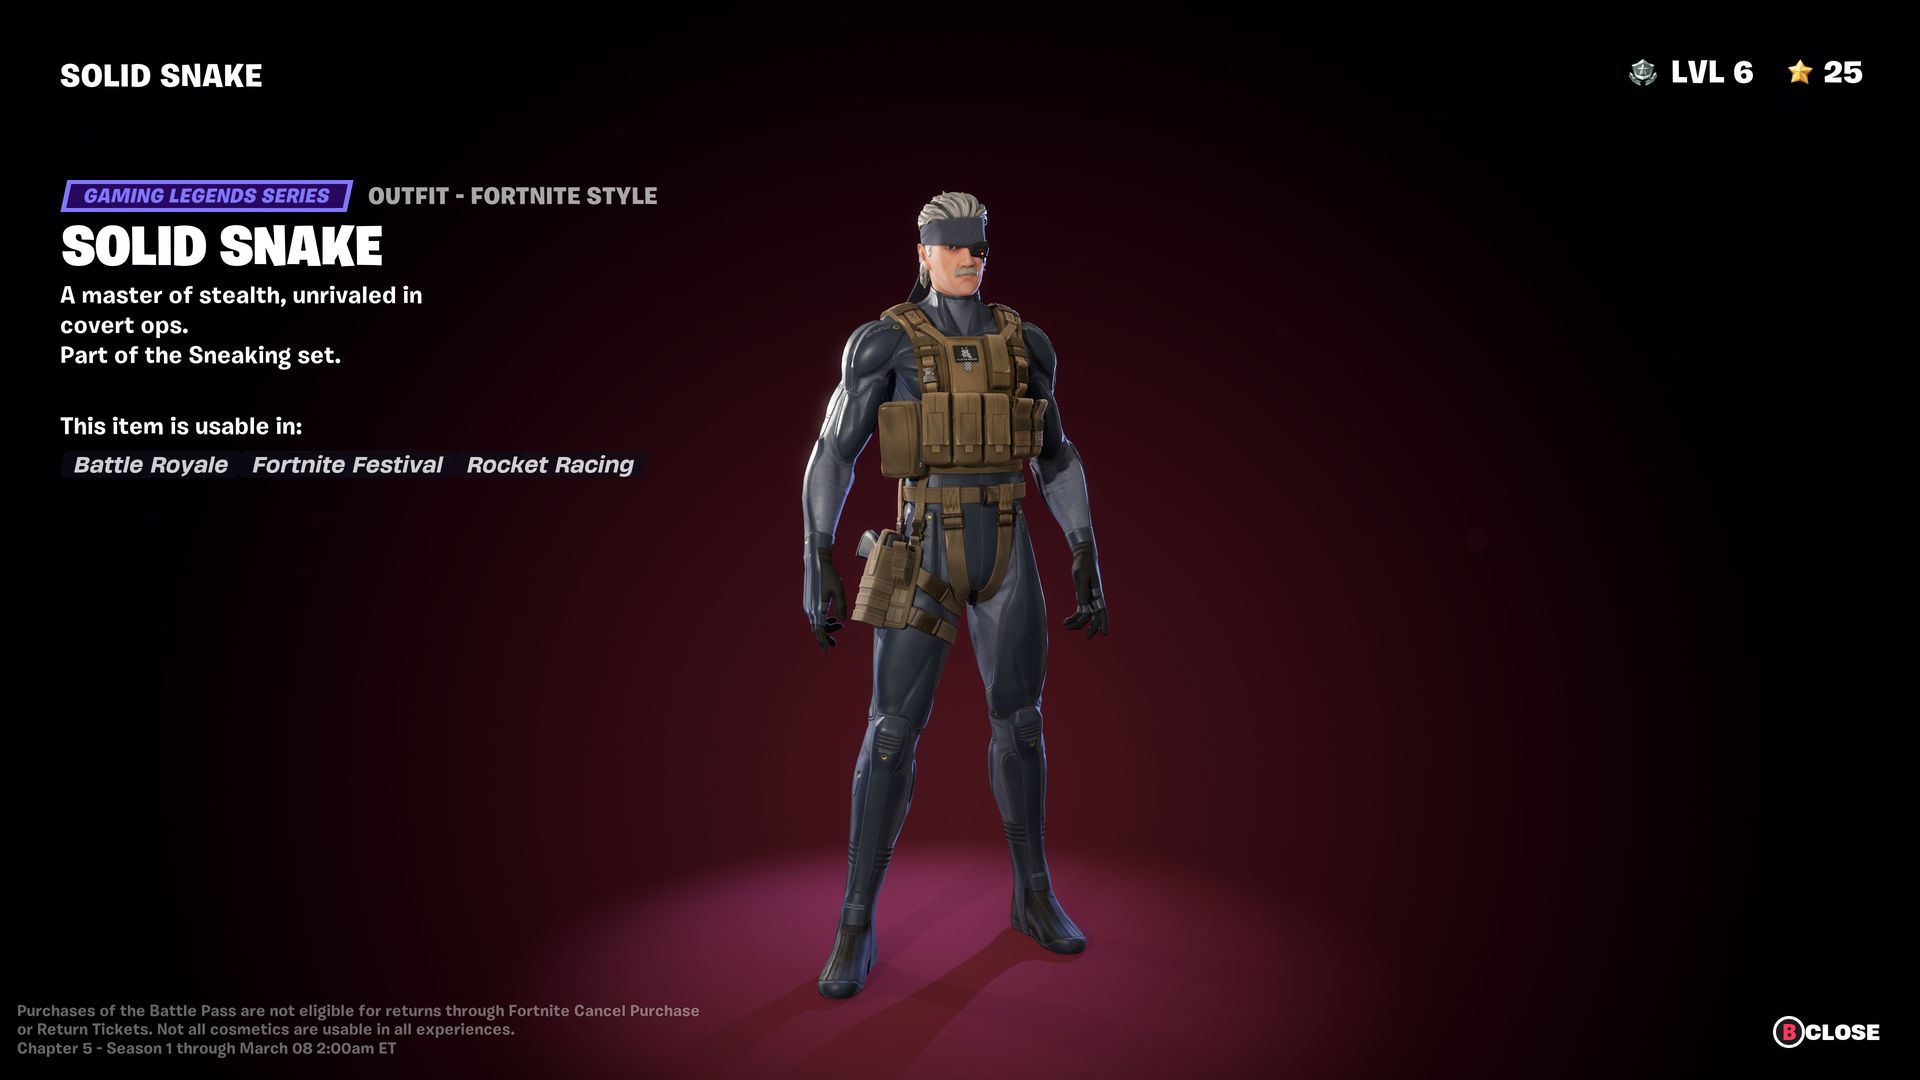 A menu shows the character model for Old Snake in the Chapter 5 Season 1 battle pass for Fortnite.